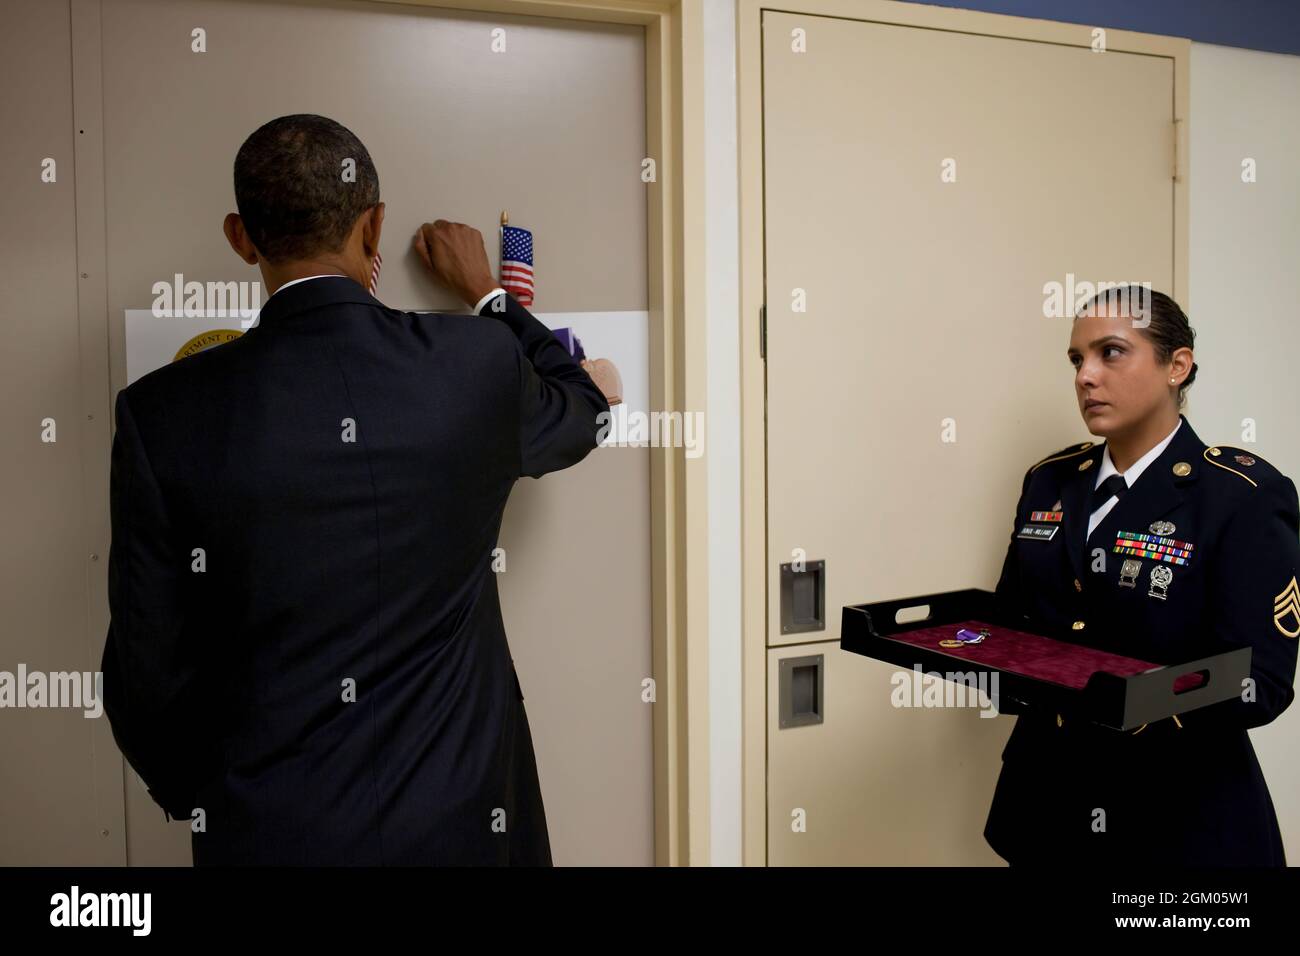 President Barack Obama knocks on the door before entering a soldier's room at Walter Reed Army Medical Center in Washington, D.C., Aug. 30, 2010. The President met with 24 wounded warriors who served in Afghanistan, five who served in Iraq, and honored 11 soldiers with the Purple Heart. (Official White House Photo by Pete Souza) This official White House photograph is being made available only for publication by news organizations and/or for personal use printing by the subject(s) of the photograph. The photograph may not be manipulated in any way and may not be used in commercial or political Stock Photo